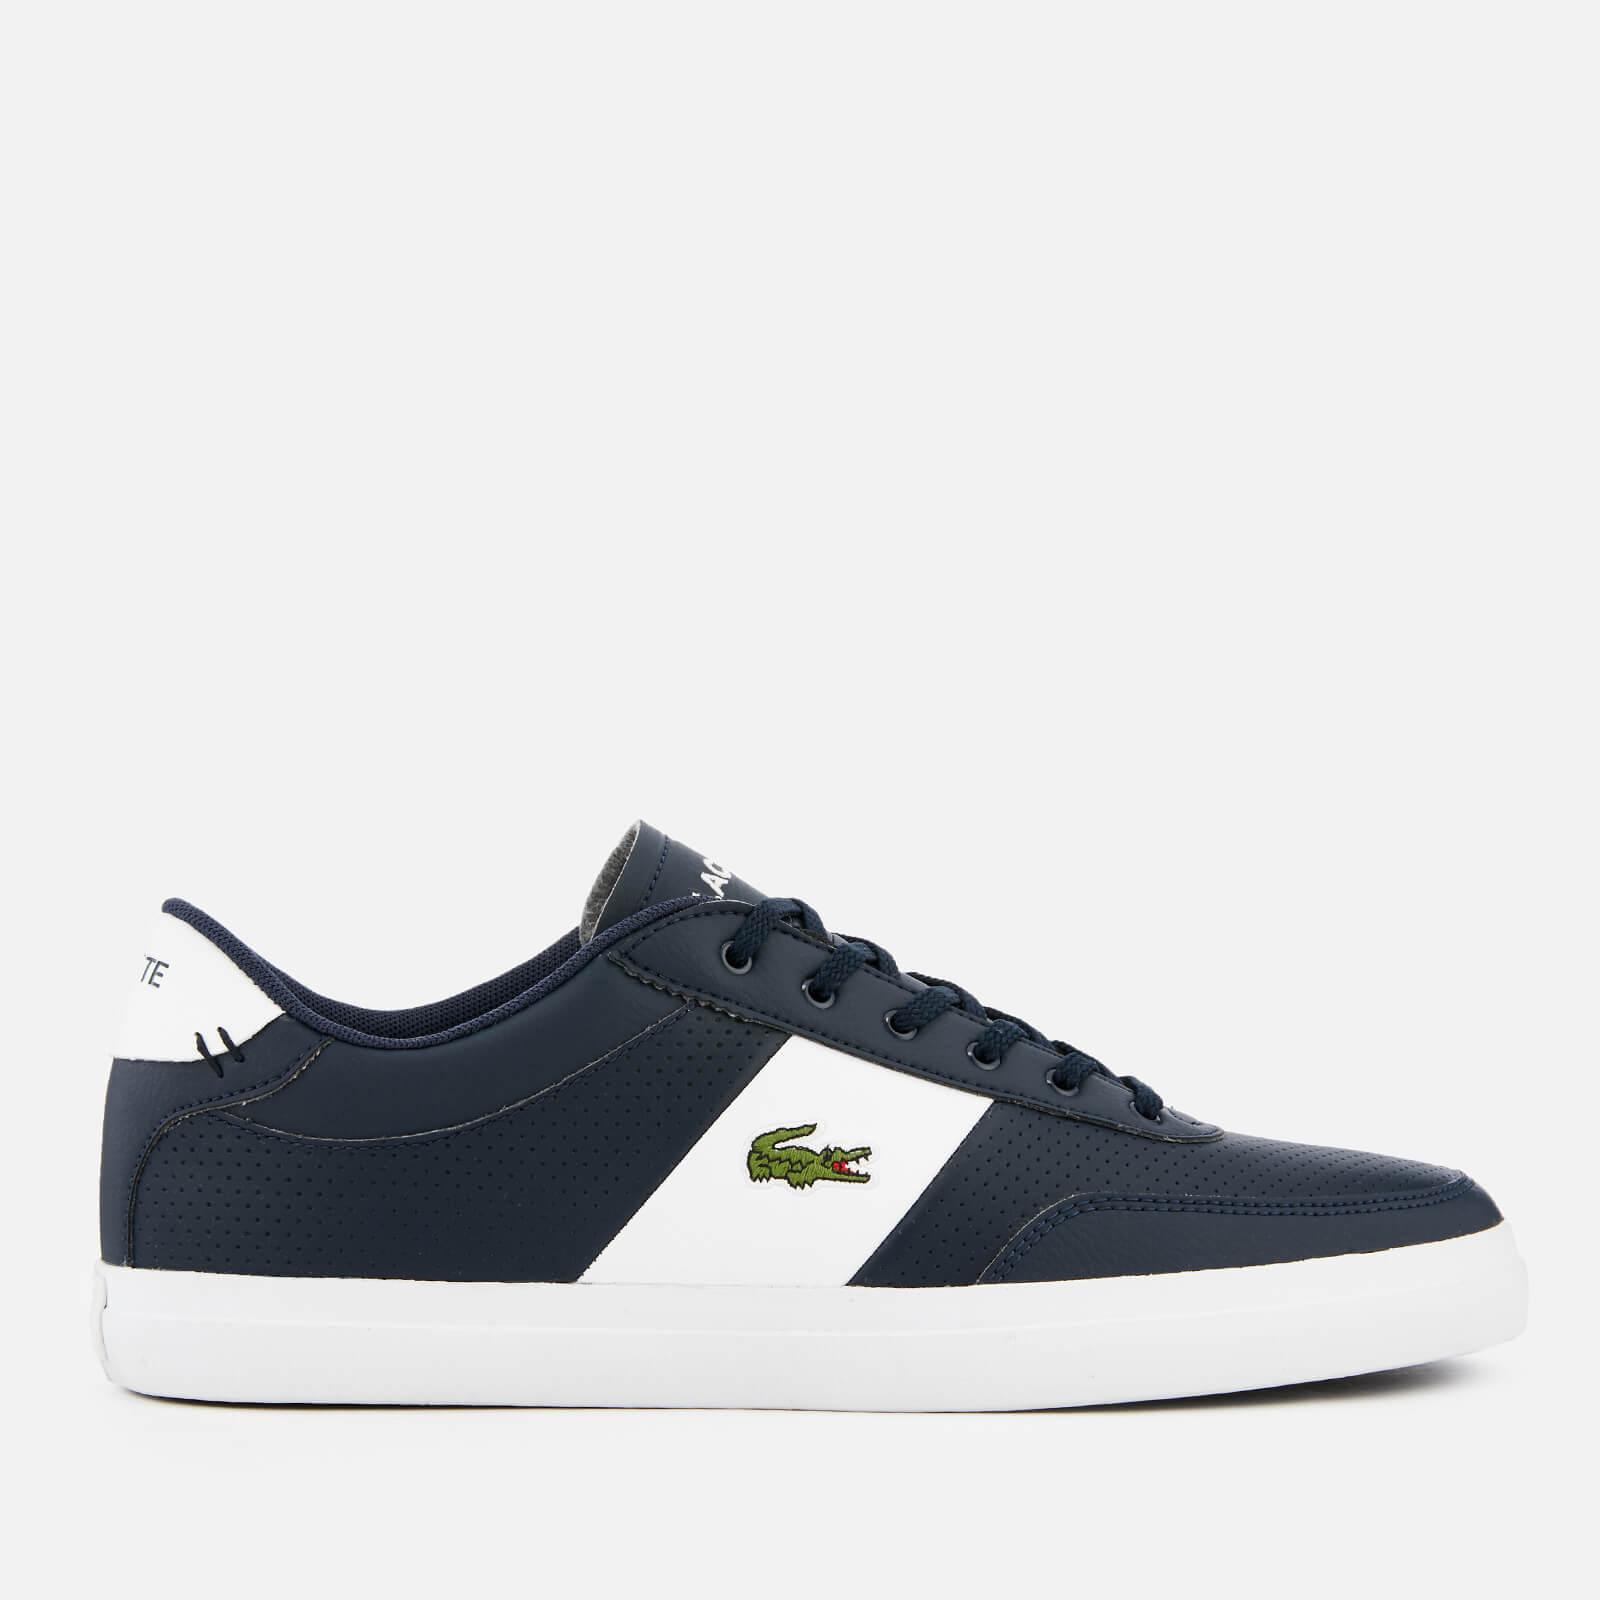 Lacoste Court Master 119 3 Big Offers, 60% OFF | aarav.co